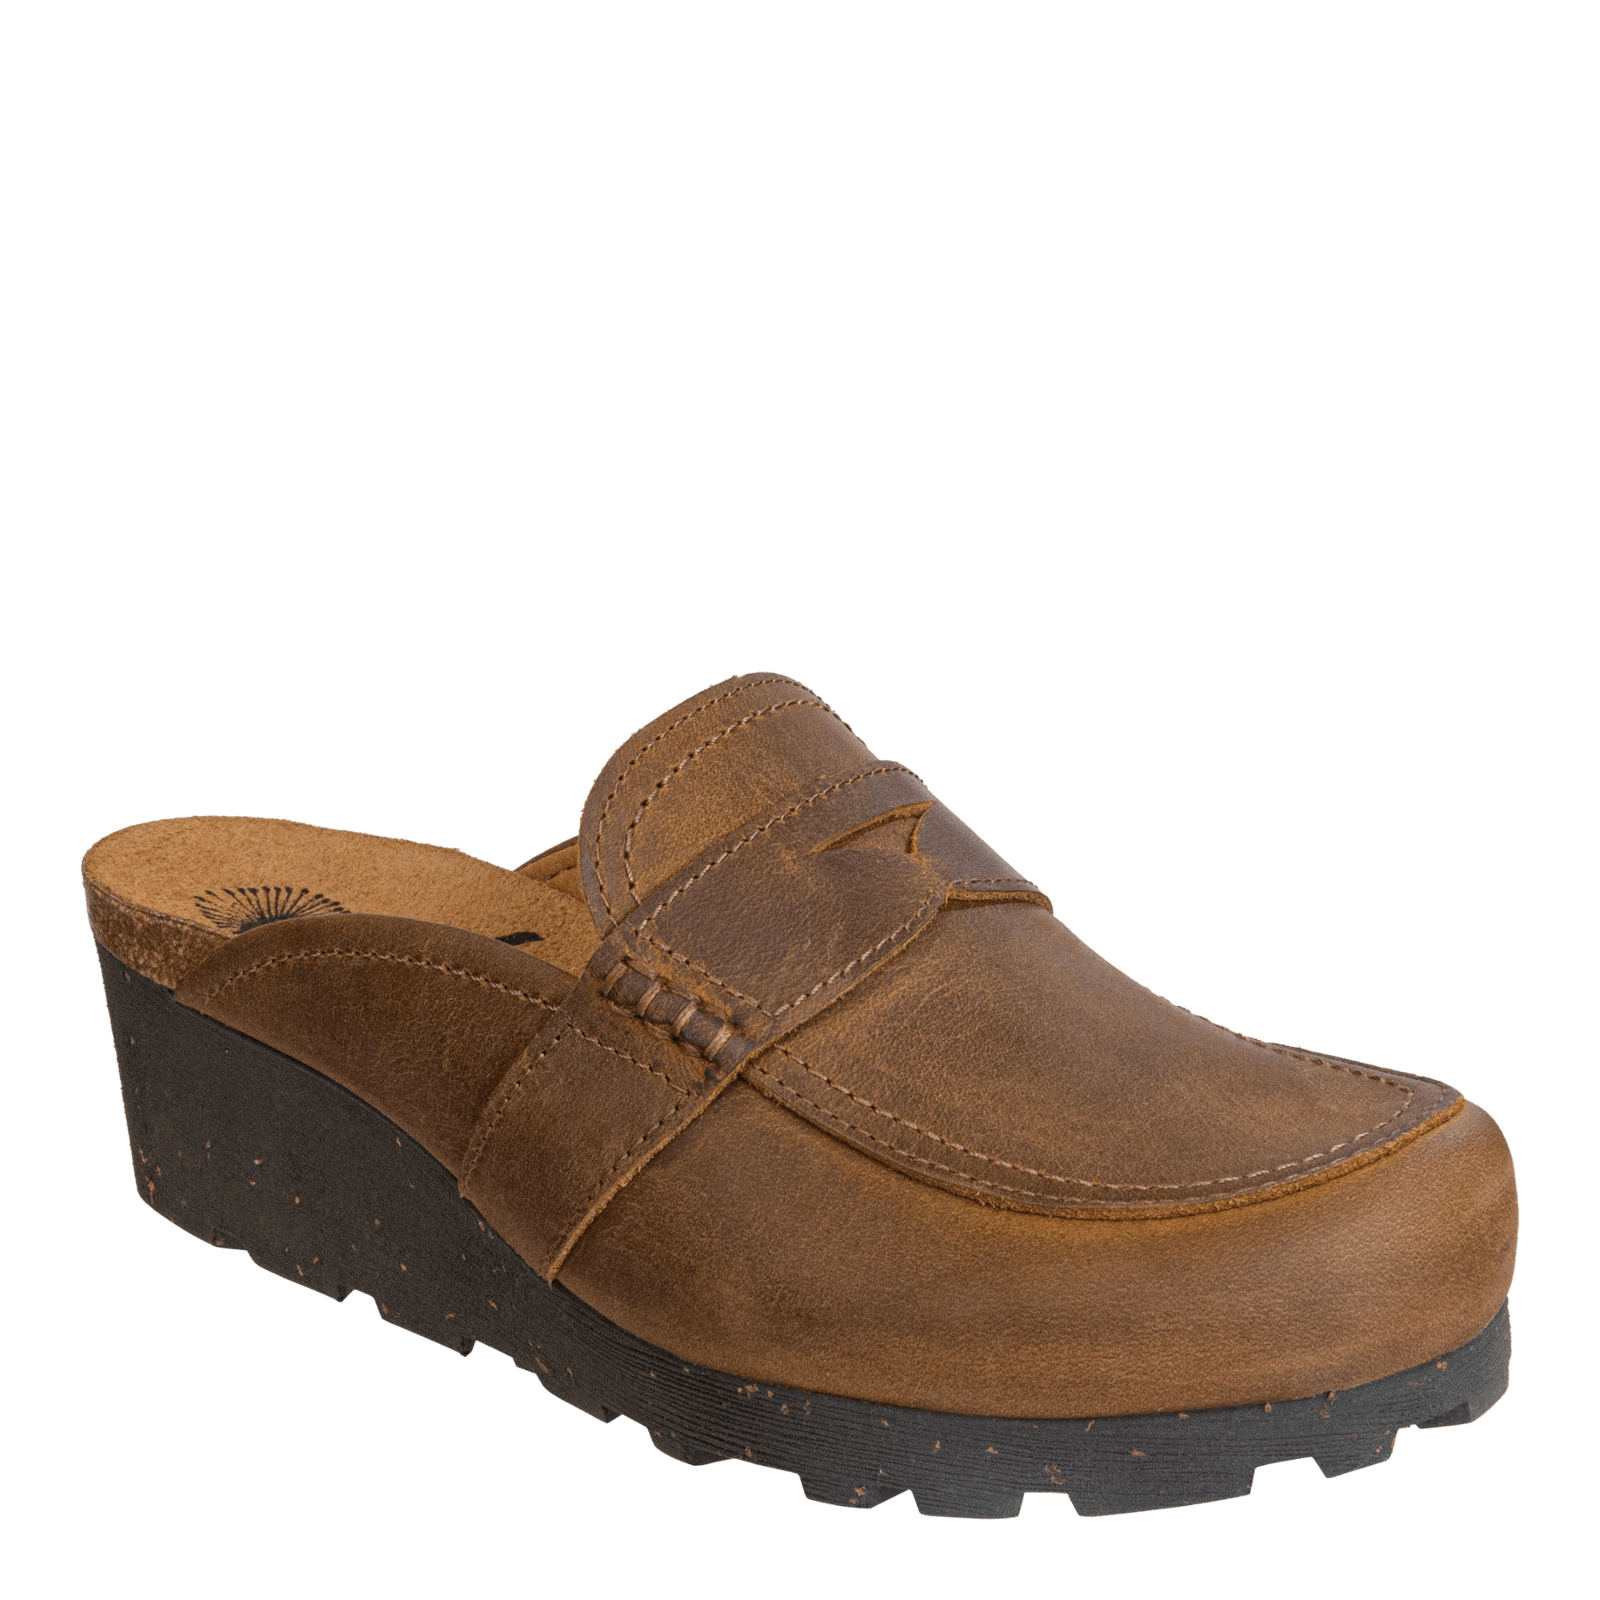 https://cdn.shopify.com/s/files/1/0872/3376/products/homage-brown-standard.1600_1600x.png?v=1695239544